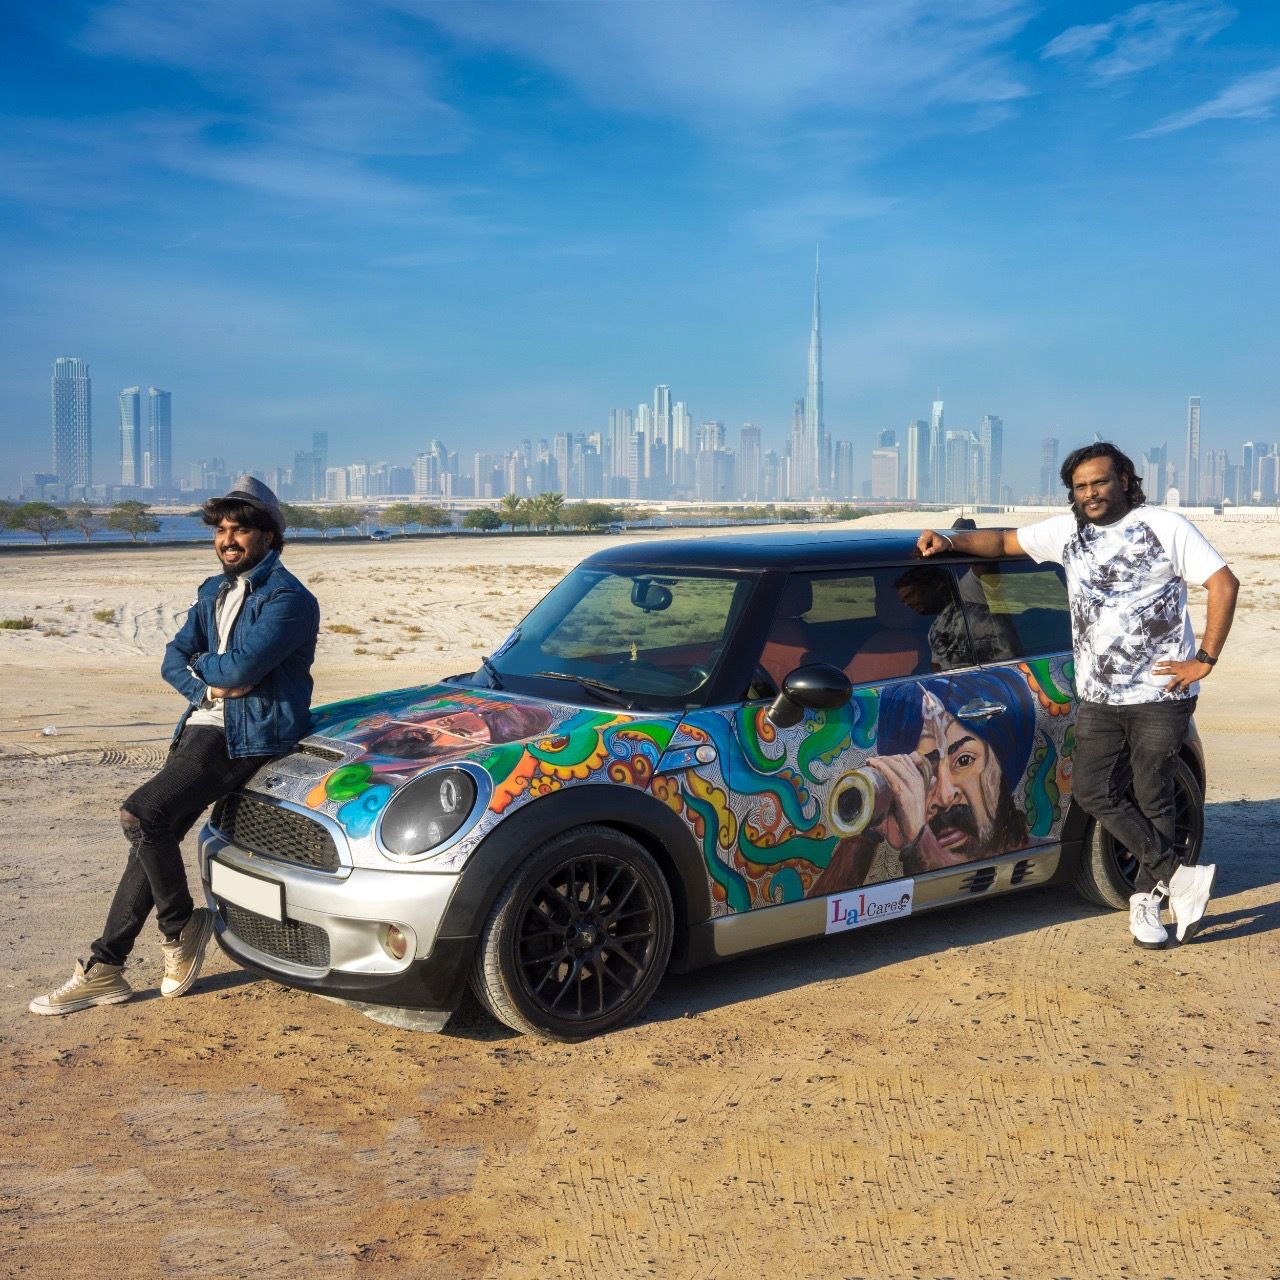 First time in Indian Cinema - hand Painted artwork on a Mini Cooper